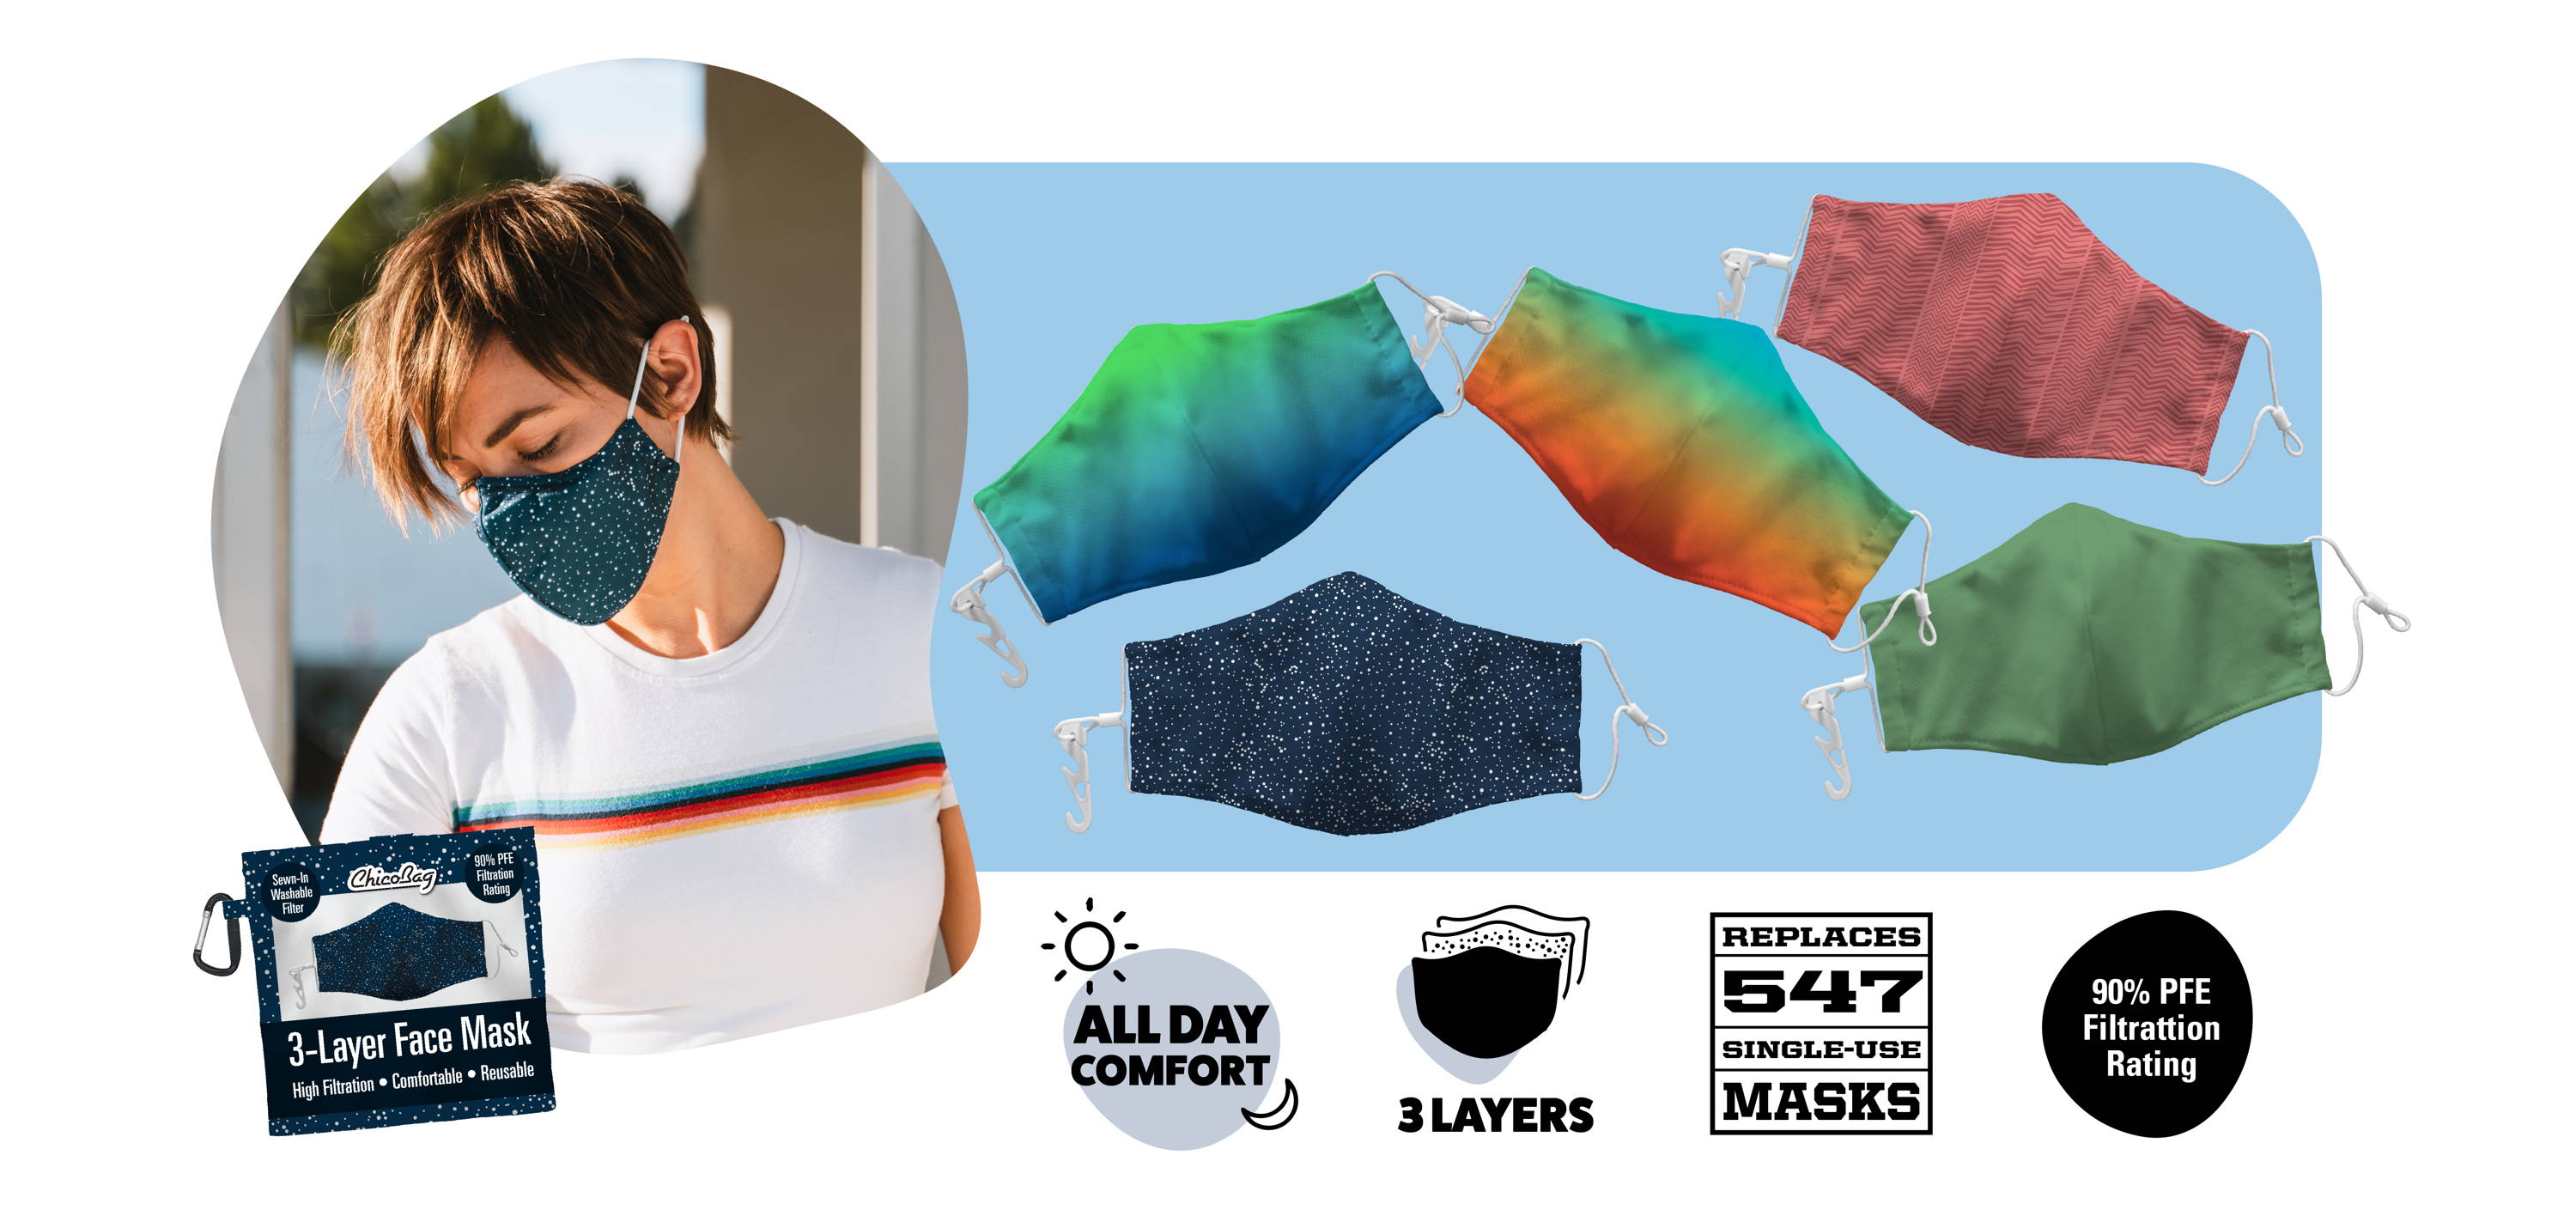 Woman wearing twilight mask outside with carrying pouch over the image. On the right side of the image 5 print patterns of the ChicoBag 3-Layer mask that meets ASTM standards. Below their is an infographic that shows, all day comfort, 3-layer design with built in filter, repaces 547 single-use masks, and has 90% PFE rating